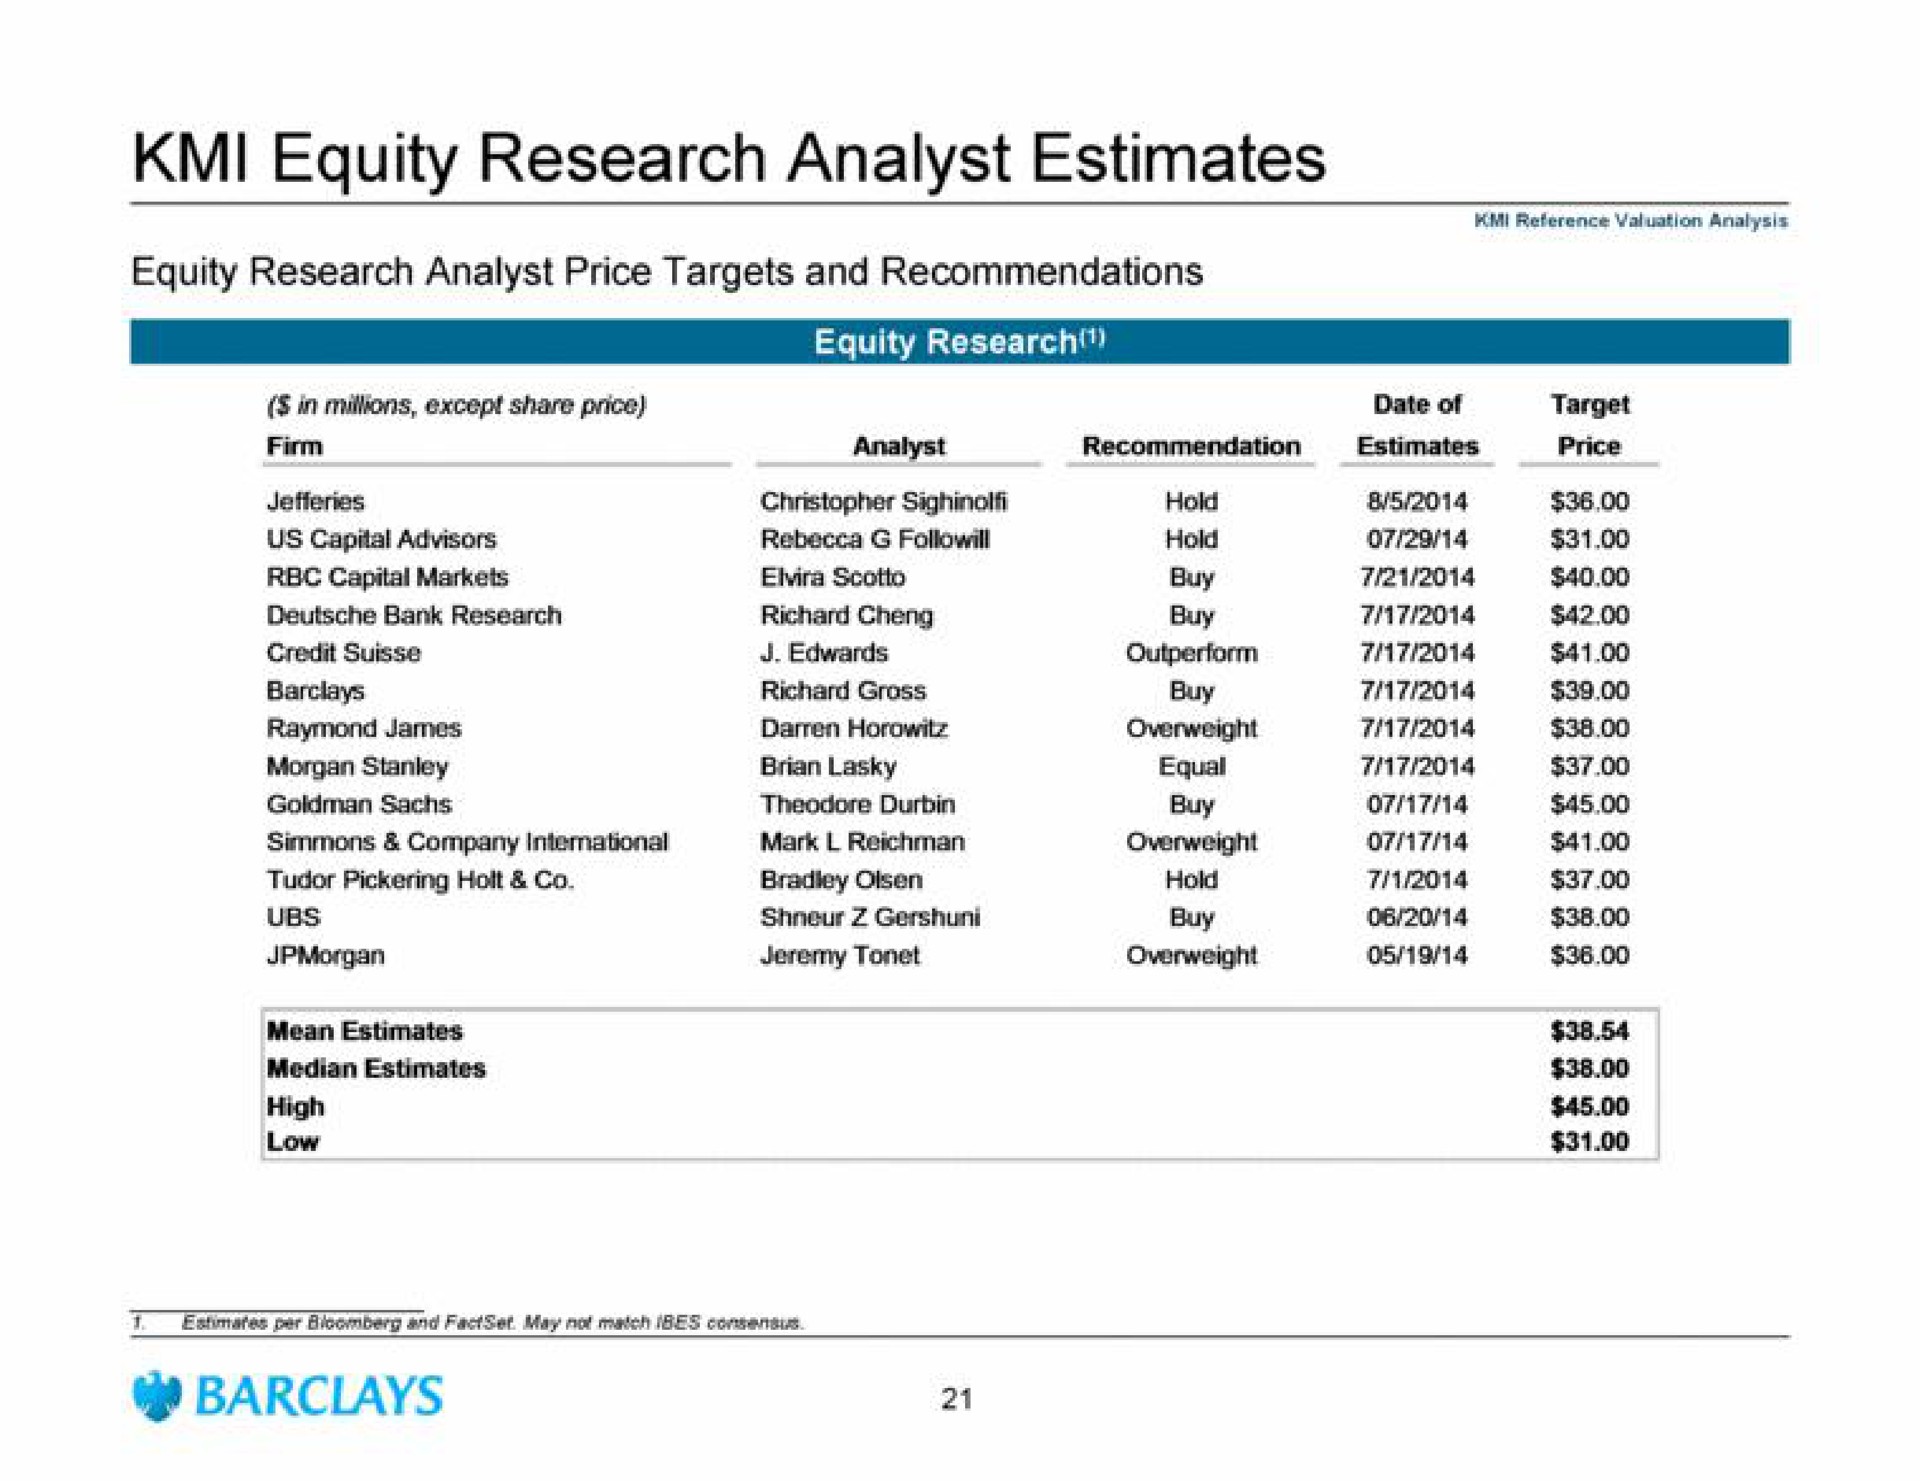 equity research analyst estimates equity research analyst price targets and recommendations | Barclays